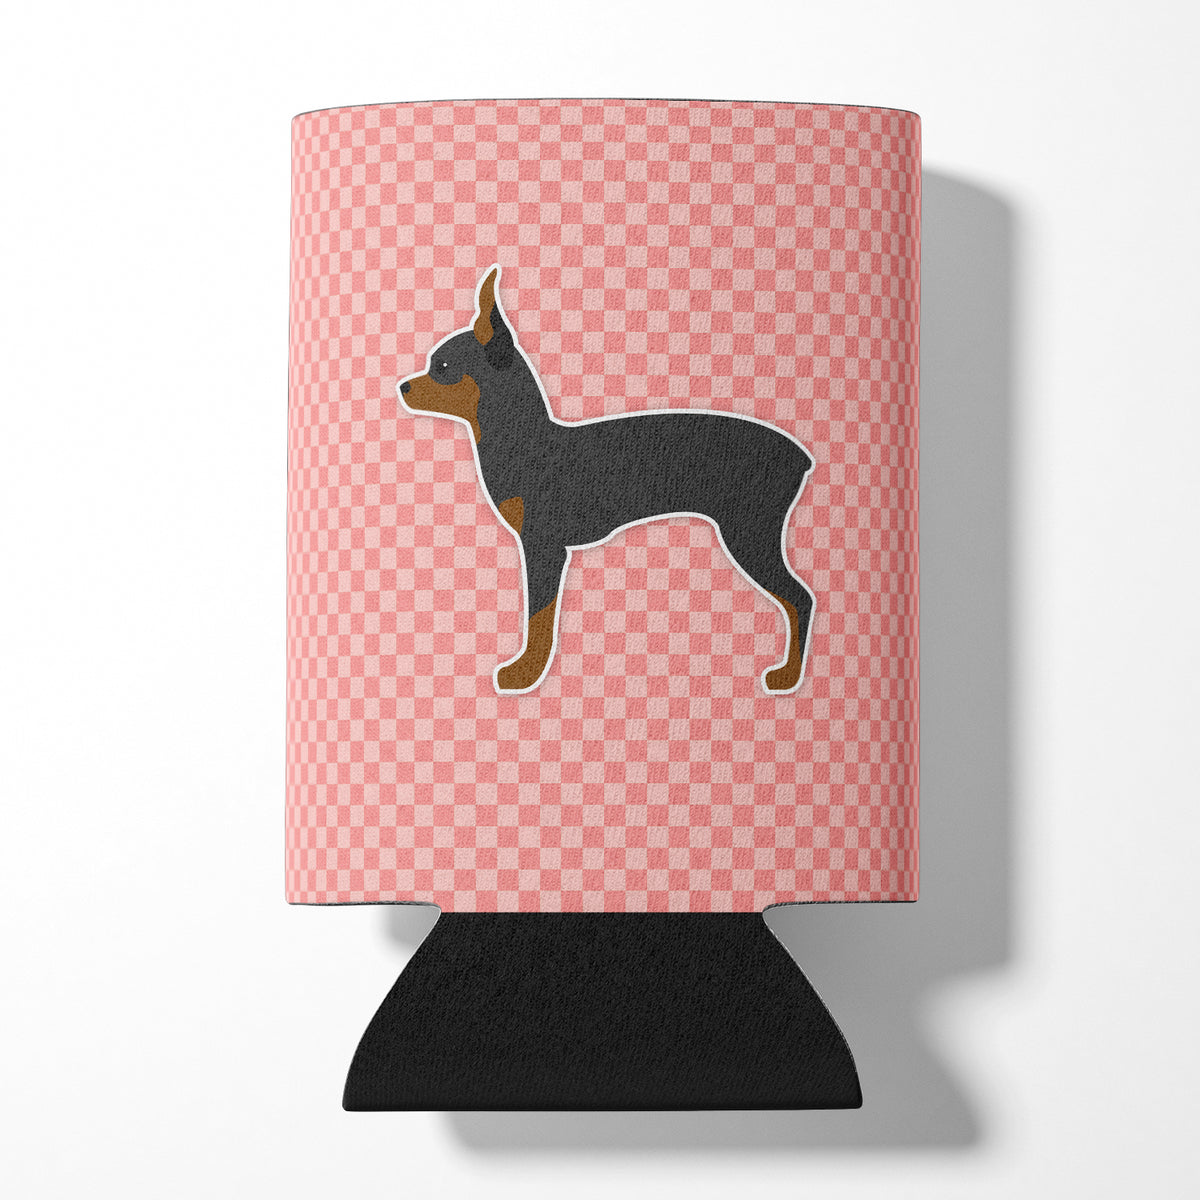 Toy Fox Terrier Checkerboard Pink Can or Bottle Hugger BB3587CC